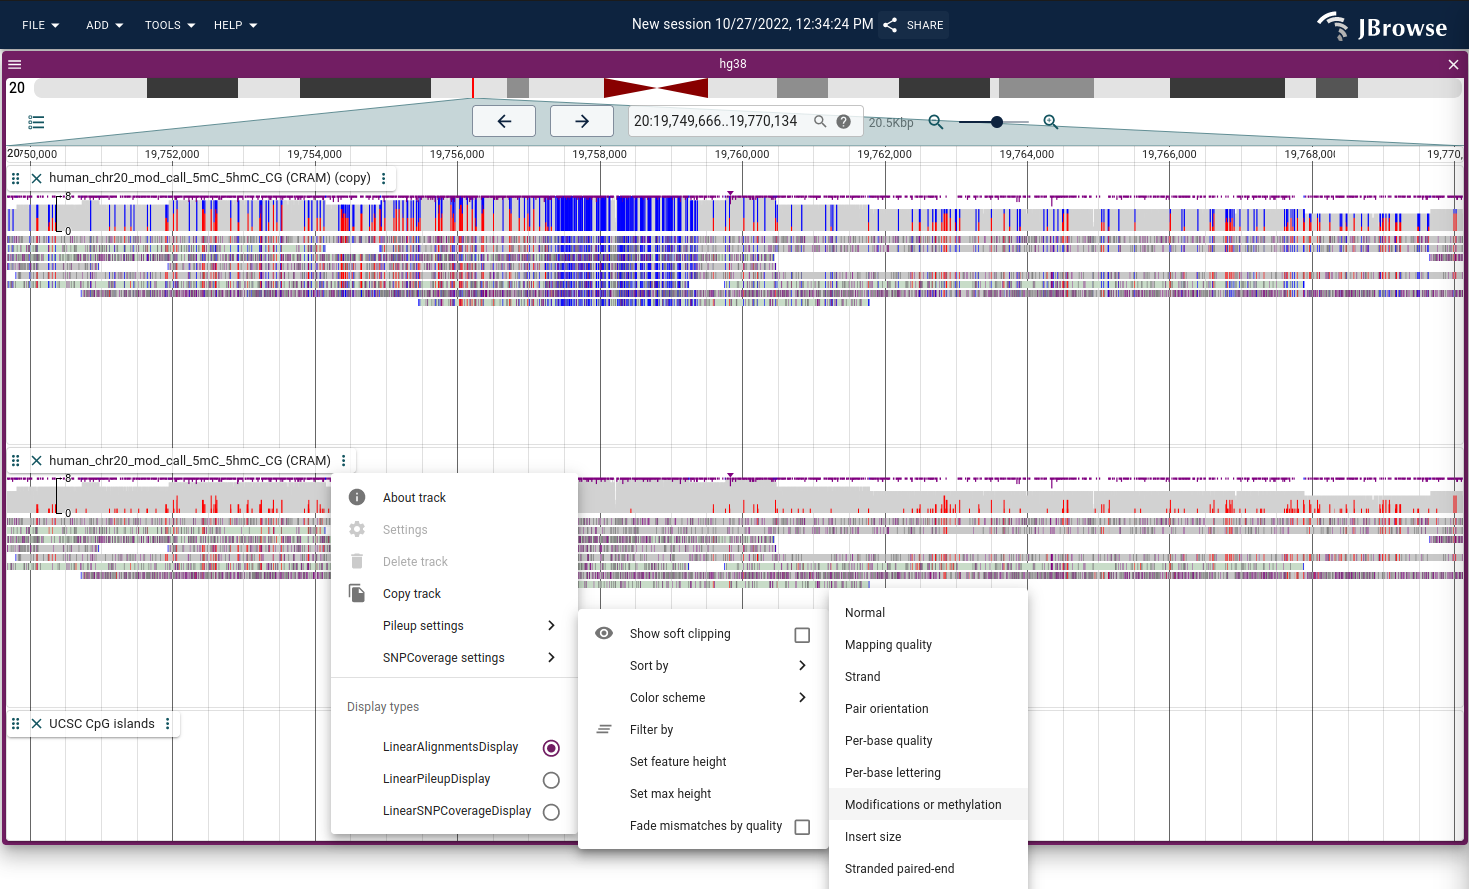 The track menu can be used to access the settings to color by modifications or methylation.